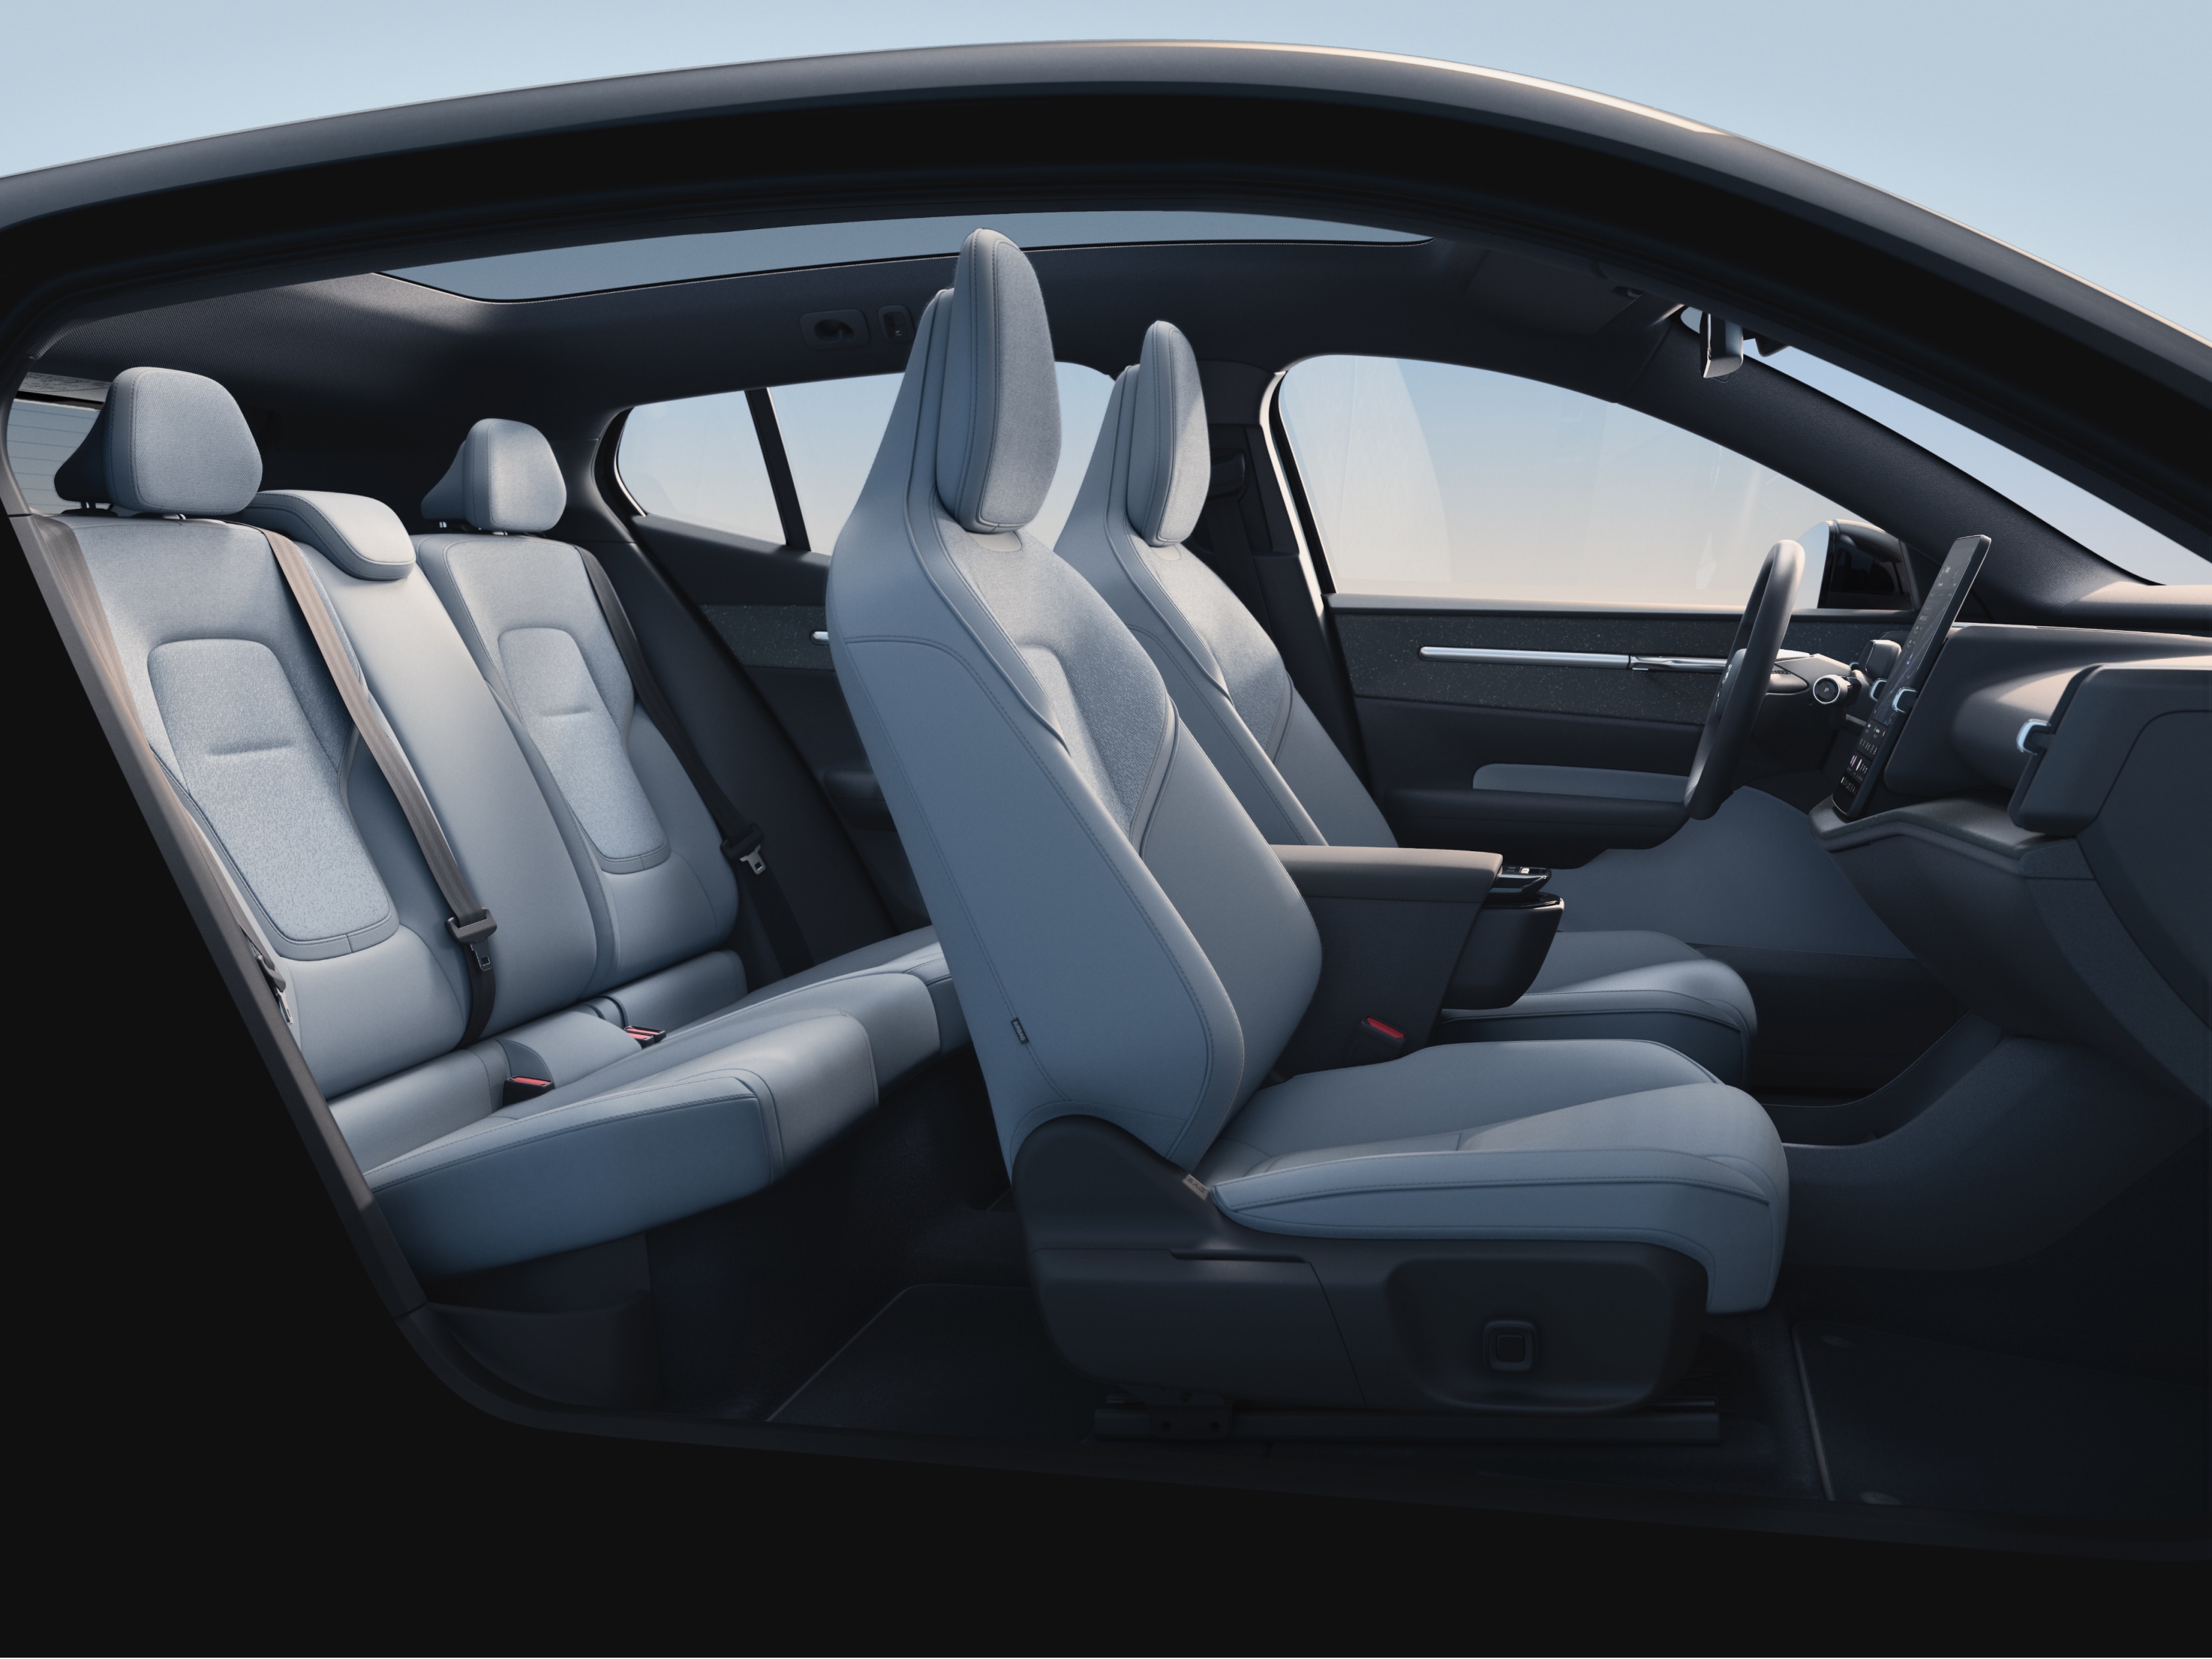 The 5-seat cabin of the Volvo EX30 in an interior design theme called Breeze.